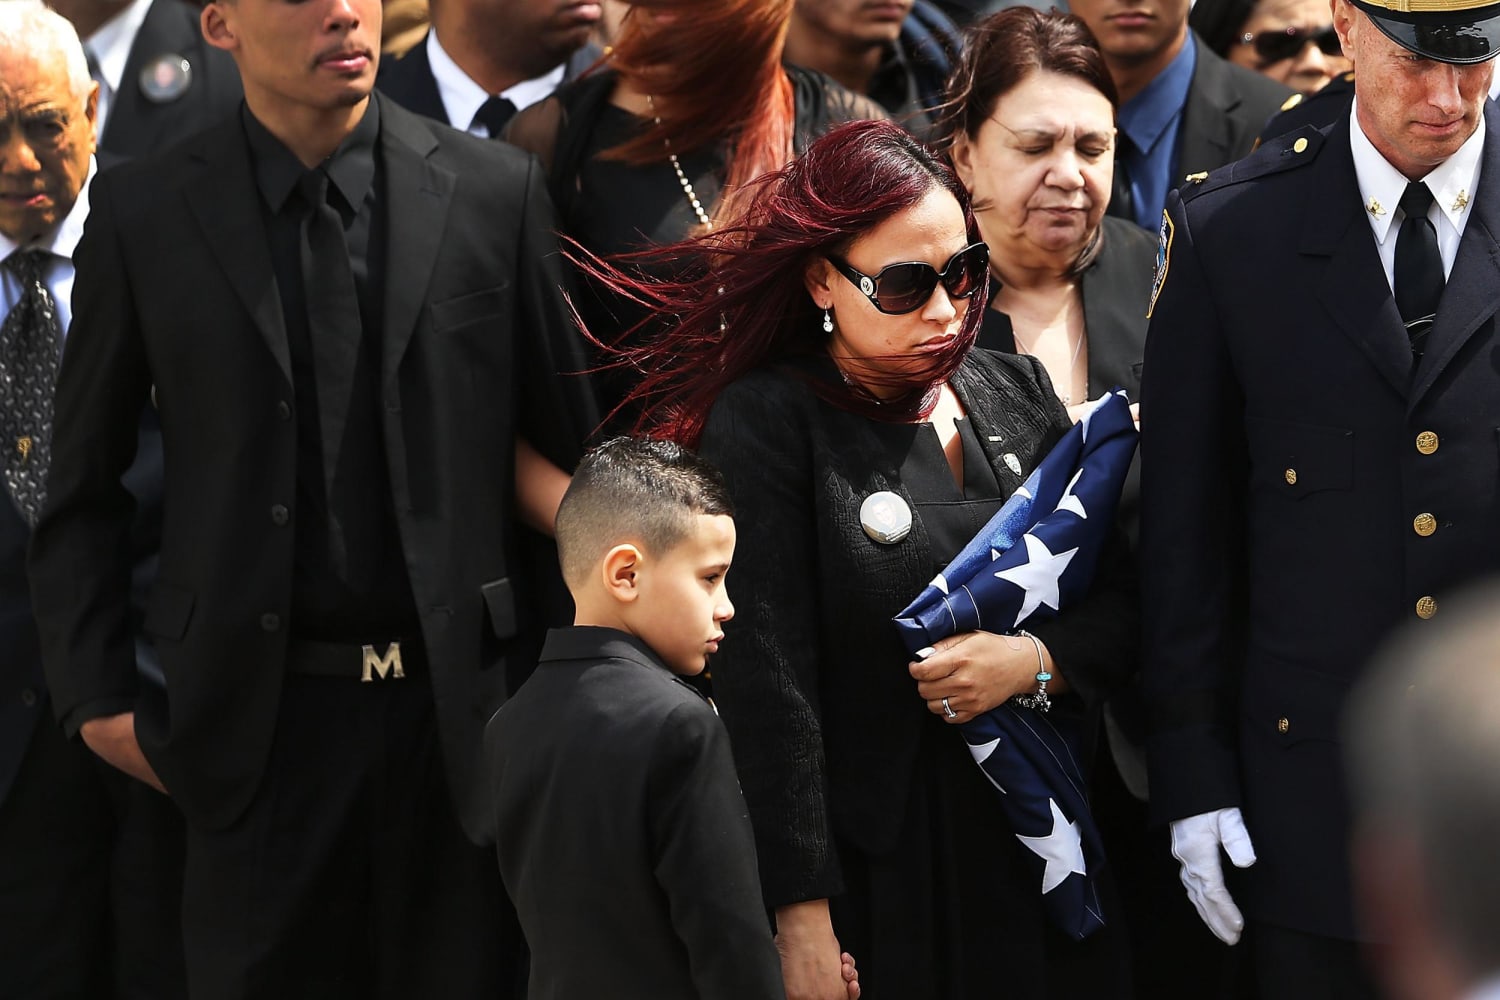 Image: Funeral Held For NYPD Officer Injured While Investigating Fire In High Rise